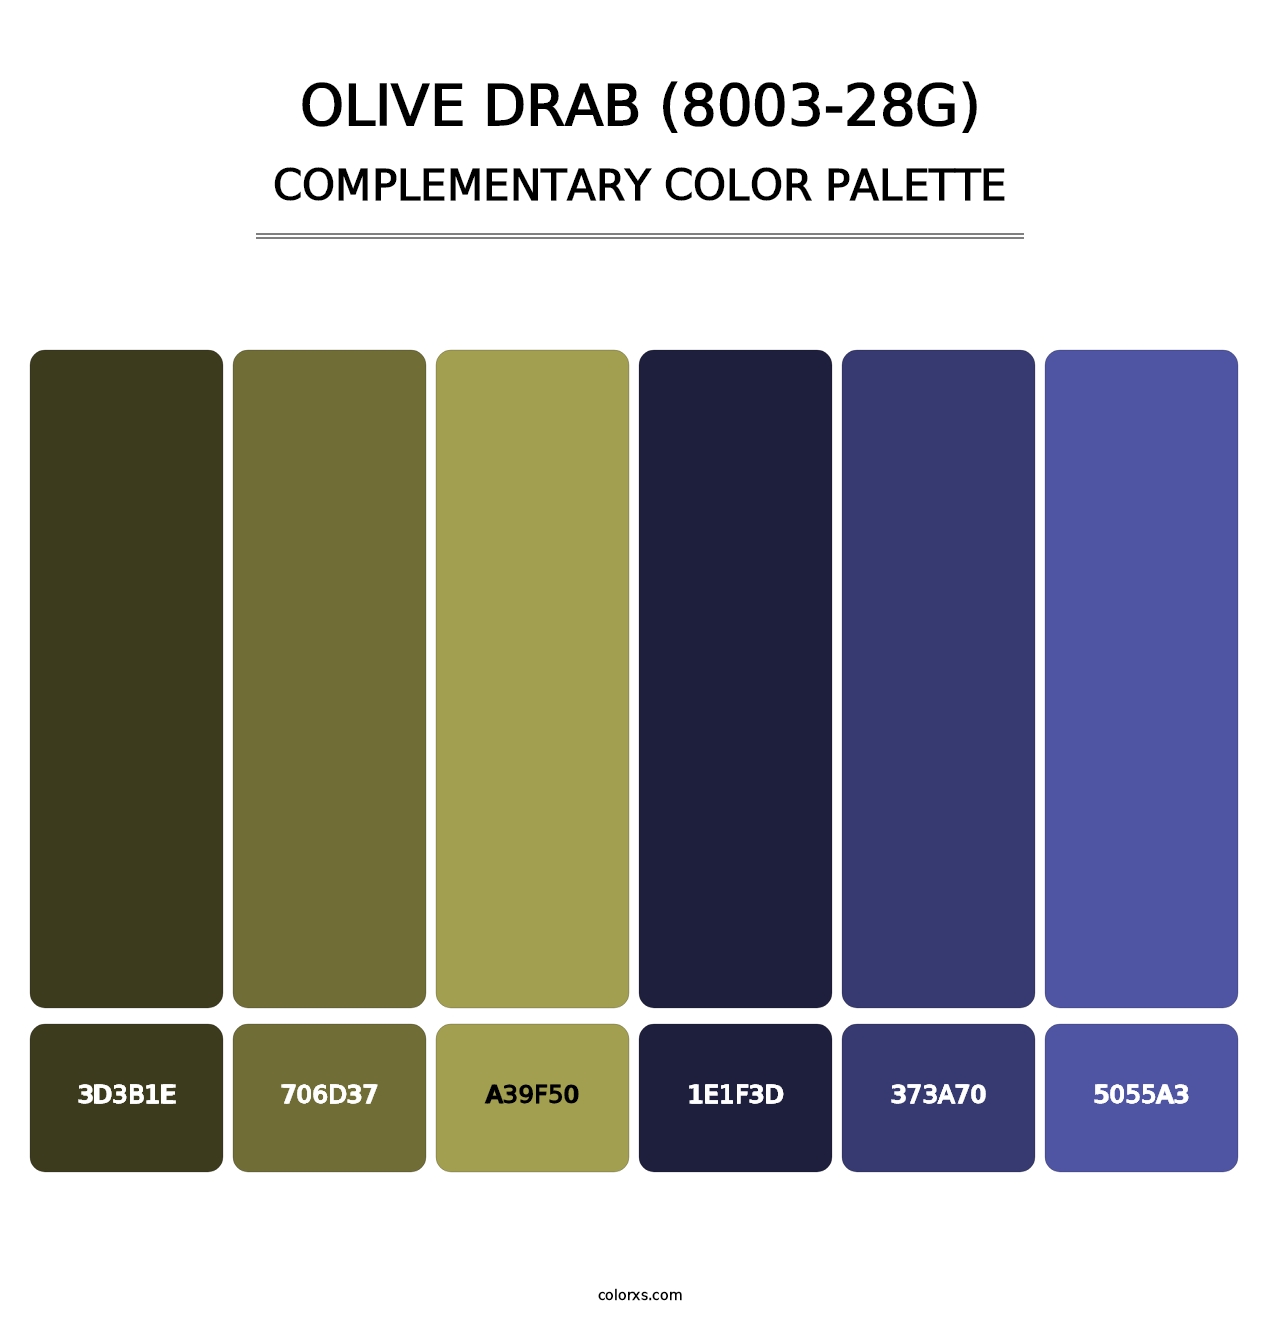 Olive Drab (8003-28G) - Complementary Color Palette